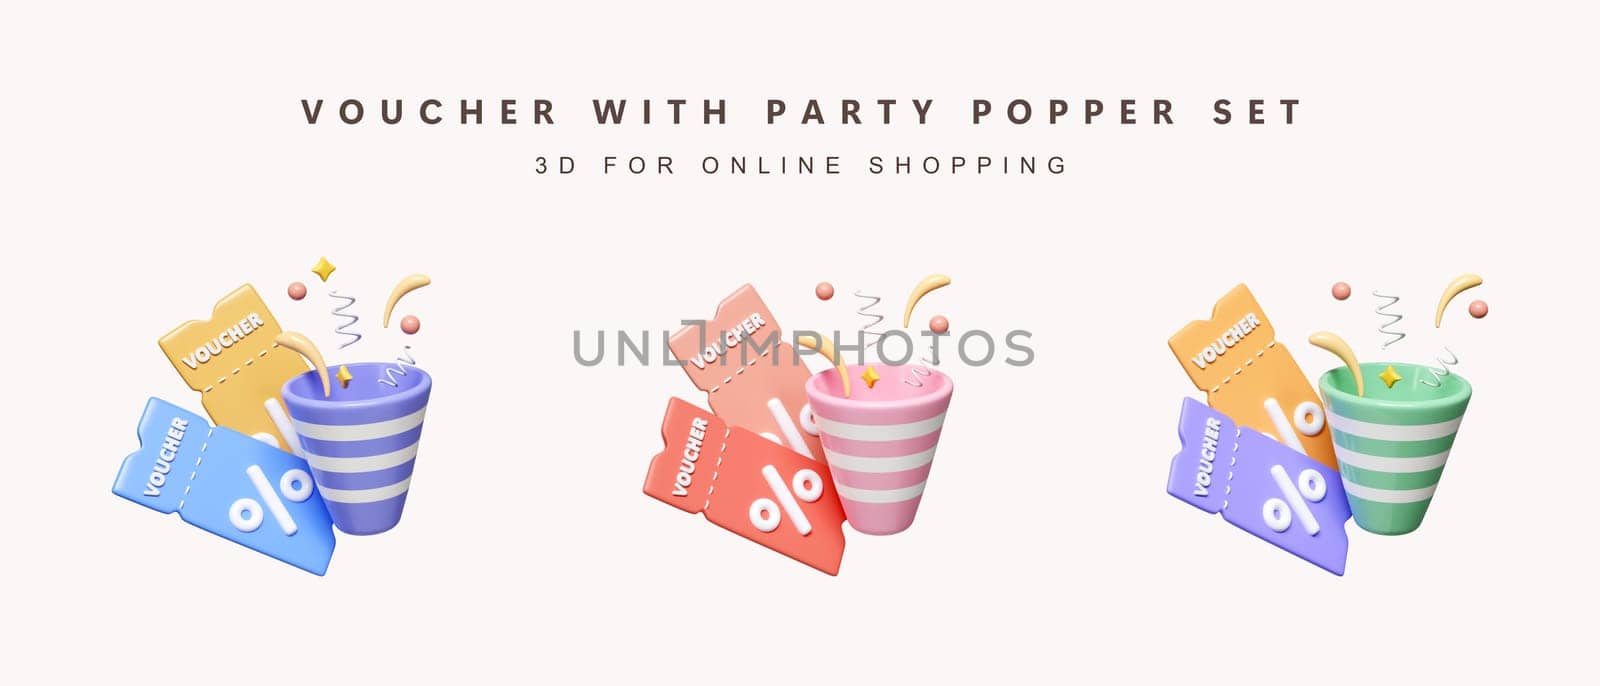 3d set of color voucher with party poppers . gift coupon. for shopping online. icon isolated on white background. 3d rendering illustration. Clipping path..